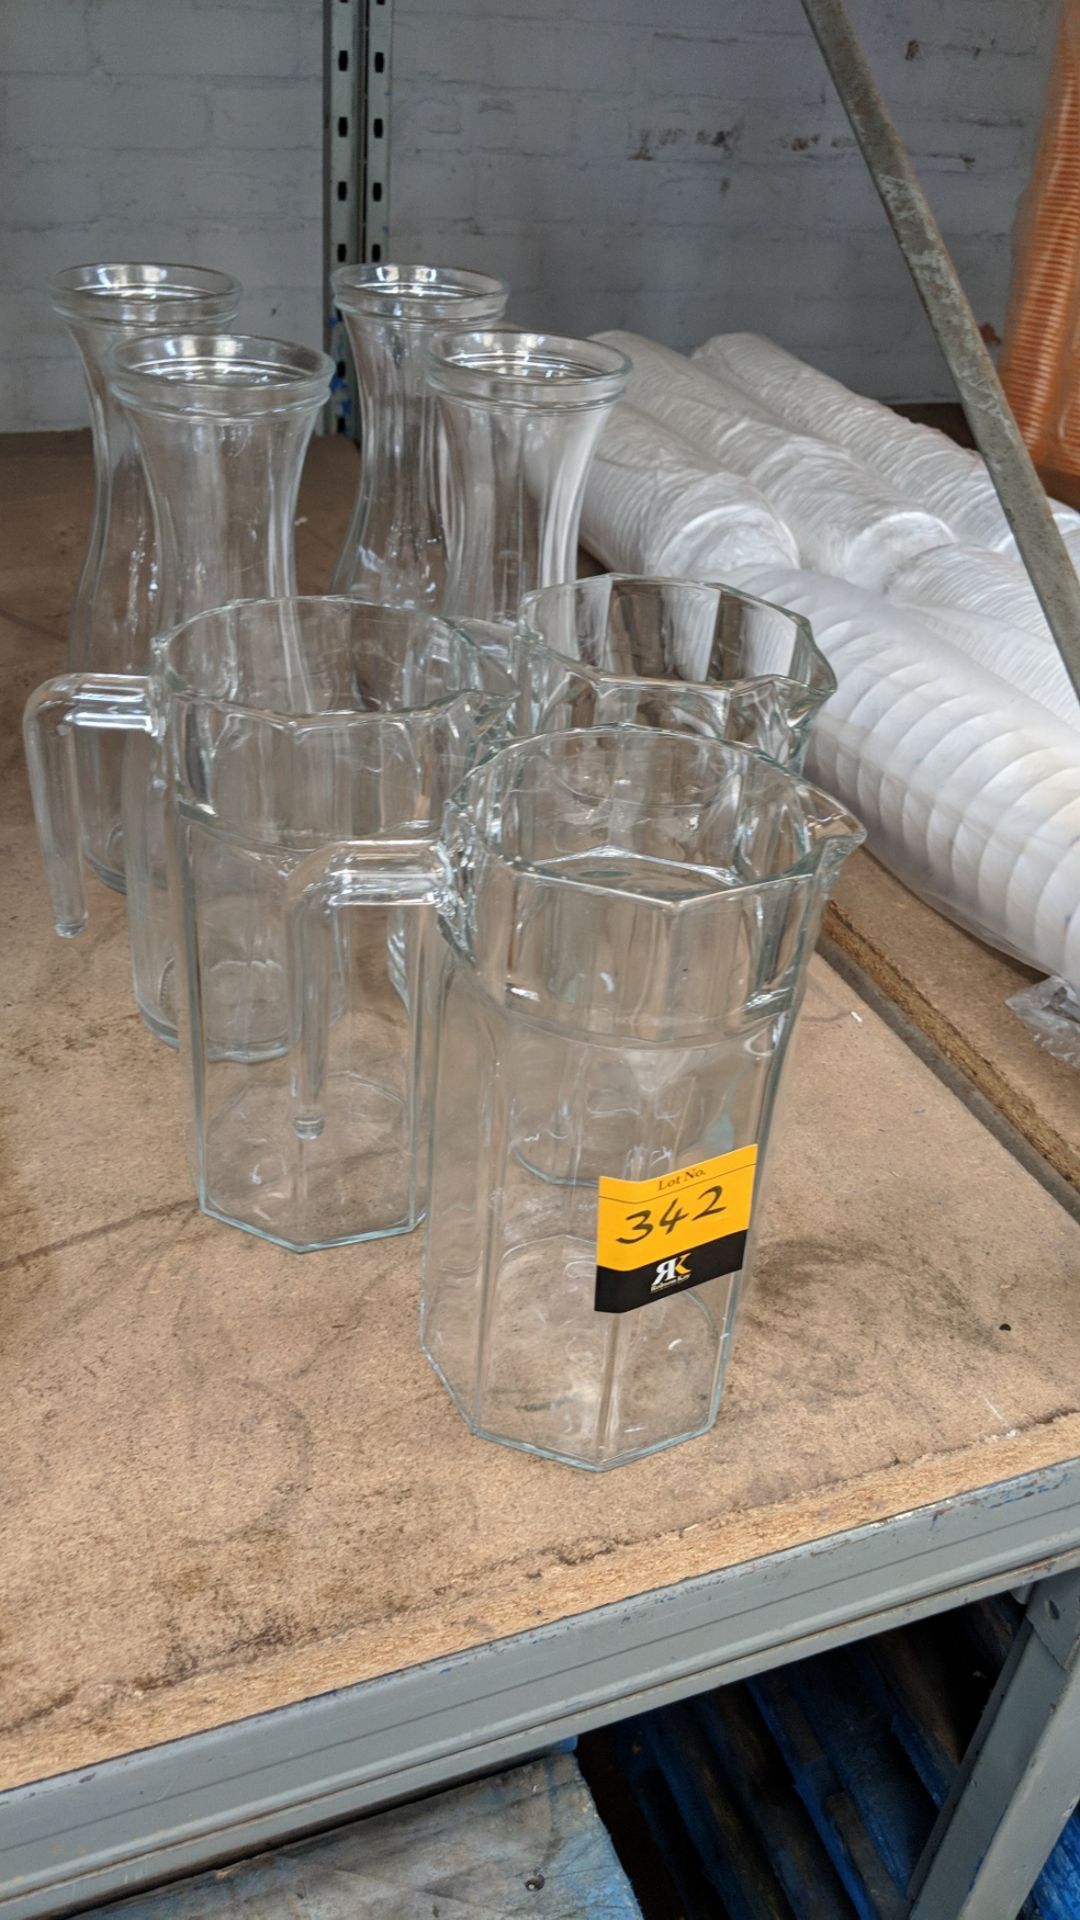 7 off assorted glass jugs and carafes IMPORTANT: Please remember goods successfully bid upon must be - Image 2 of 2